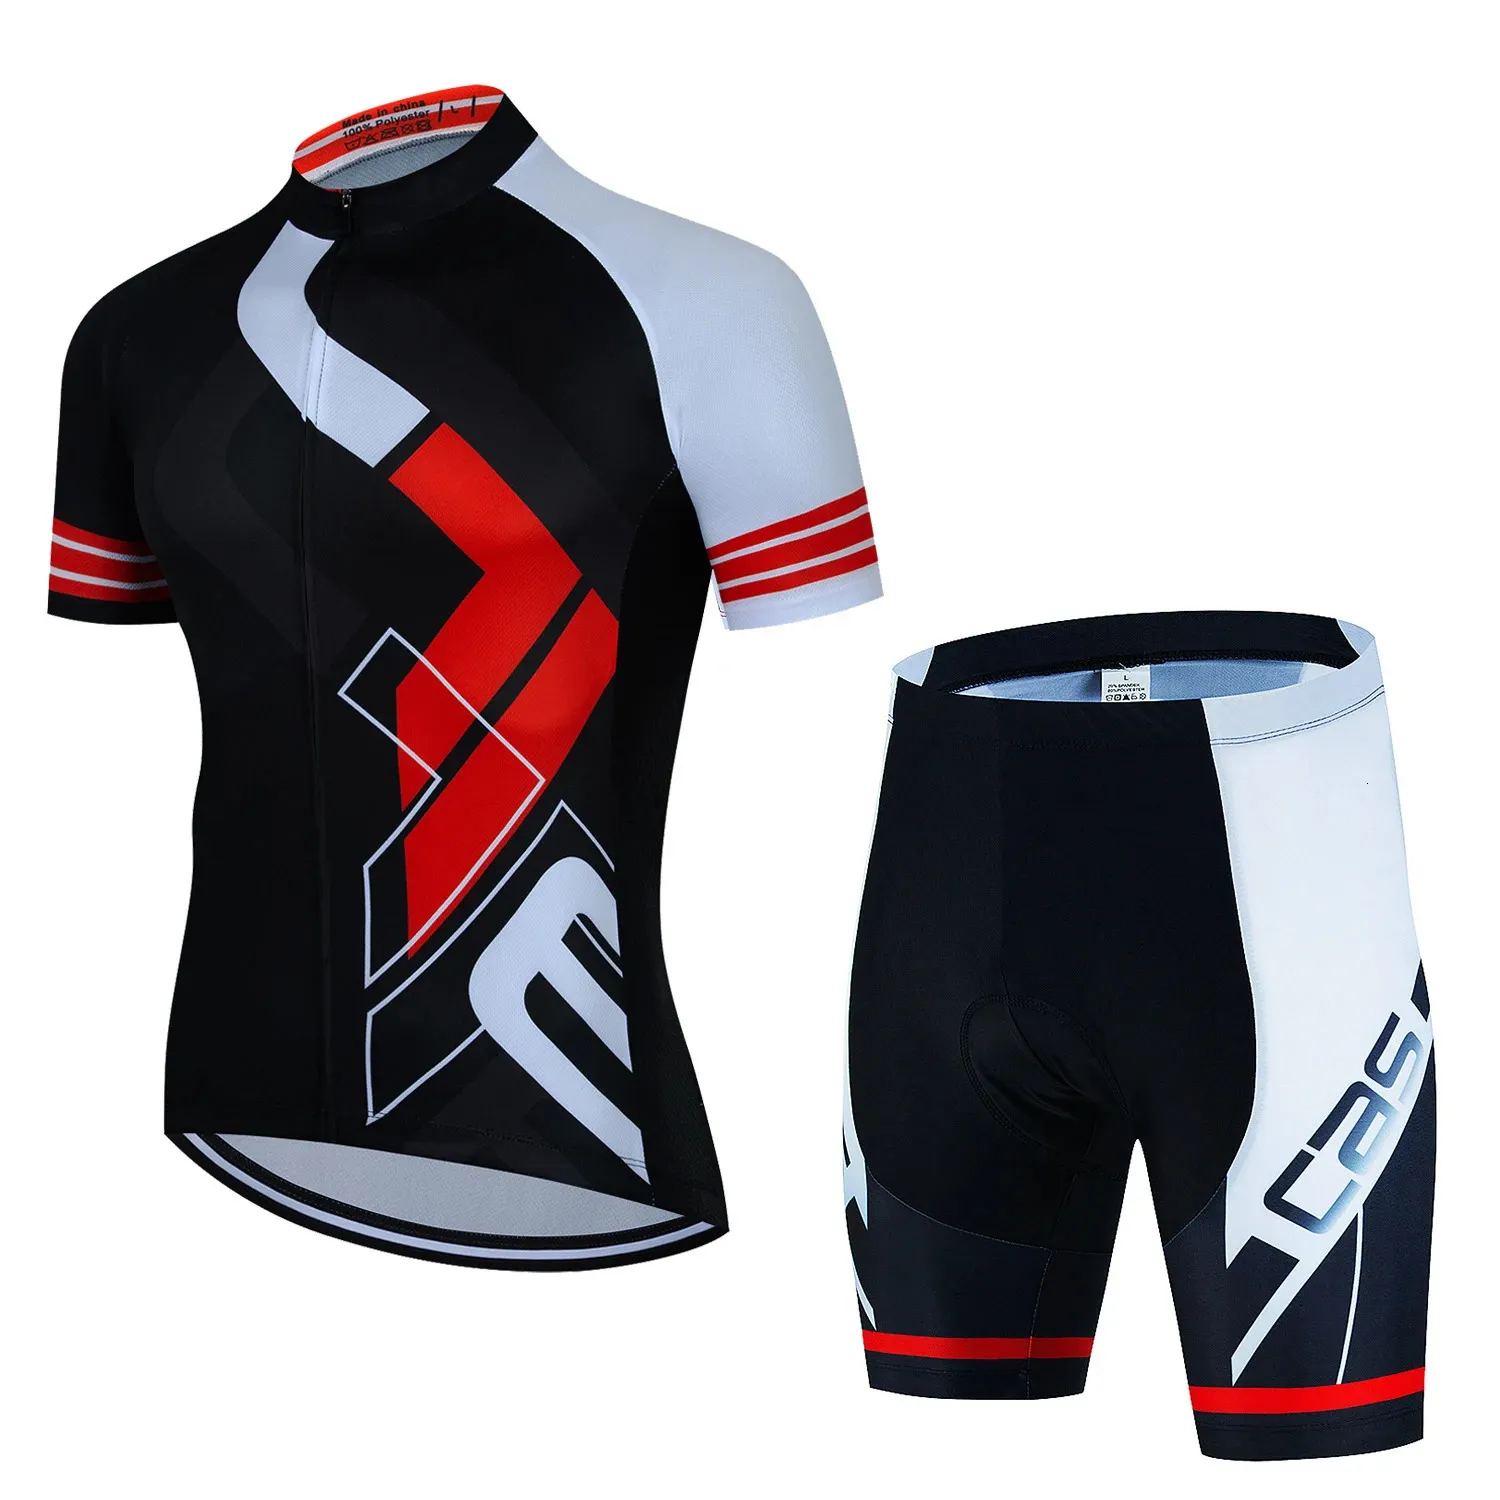 Pro Team Cycling Jersey Set Summer Clothing MTB Bike Clothes Uniform Maillot Ropa Ciclismo Man Bicycle Suit 240416